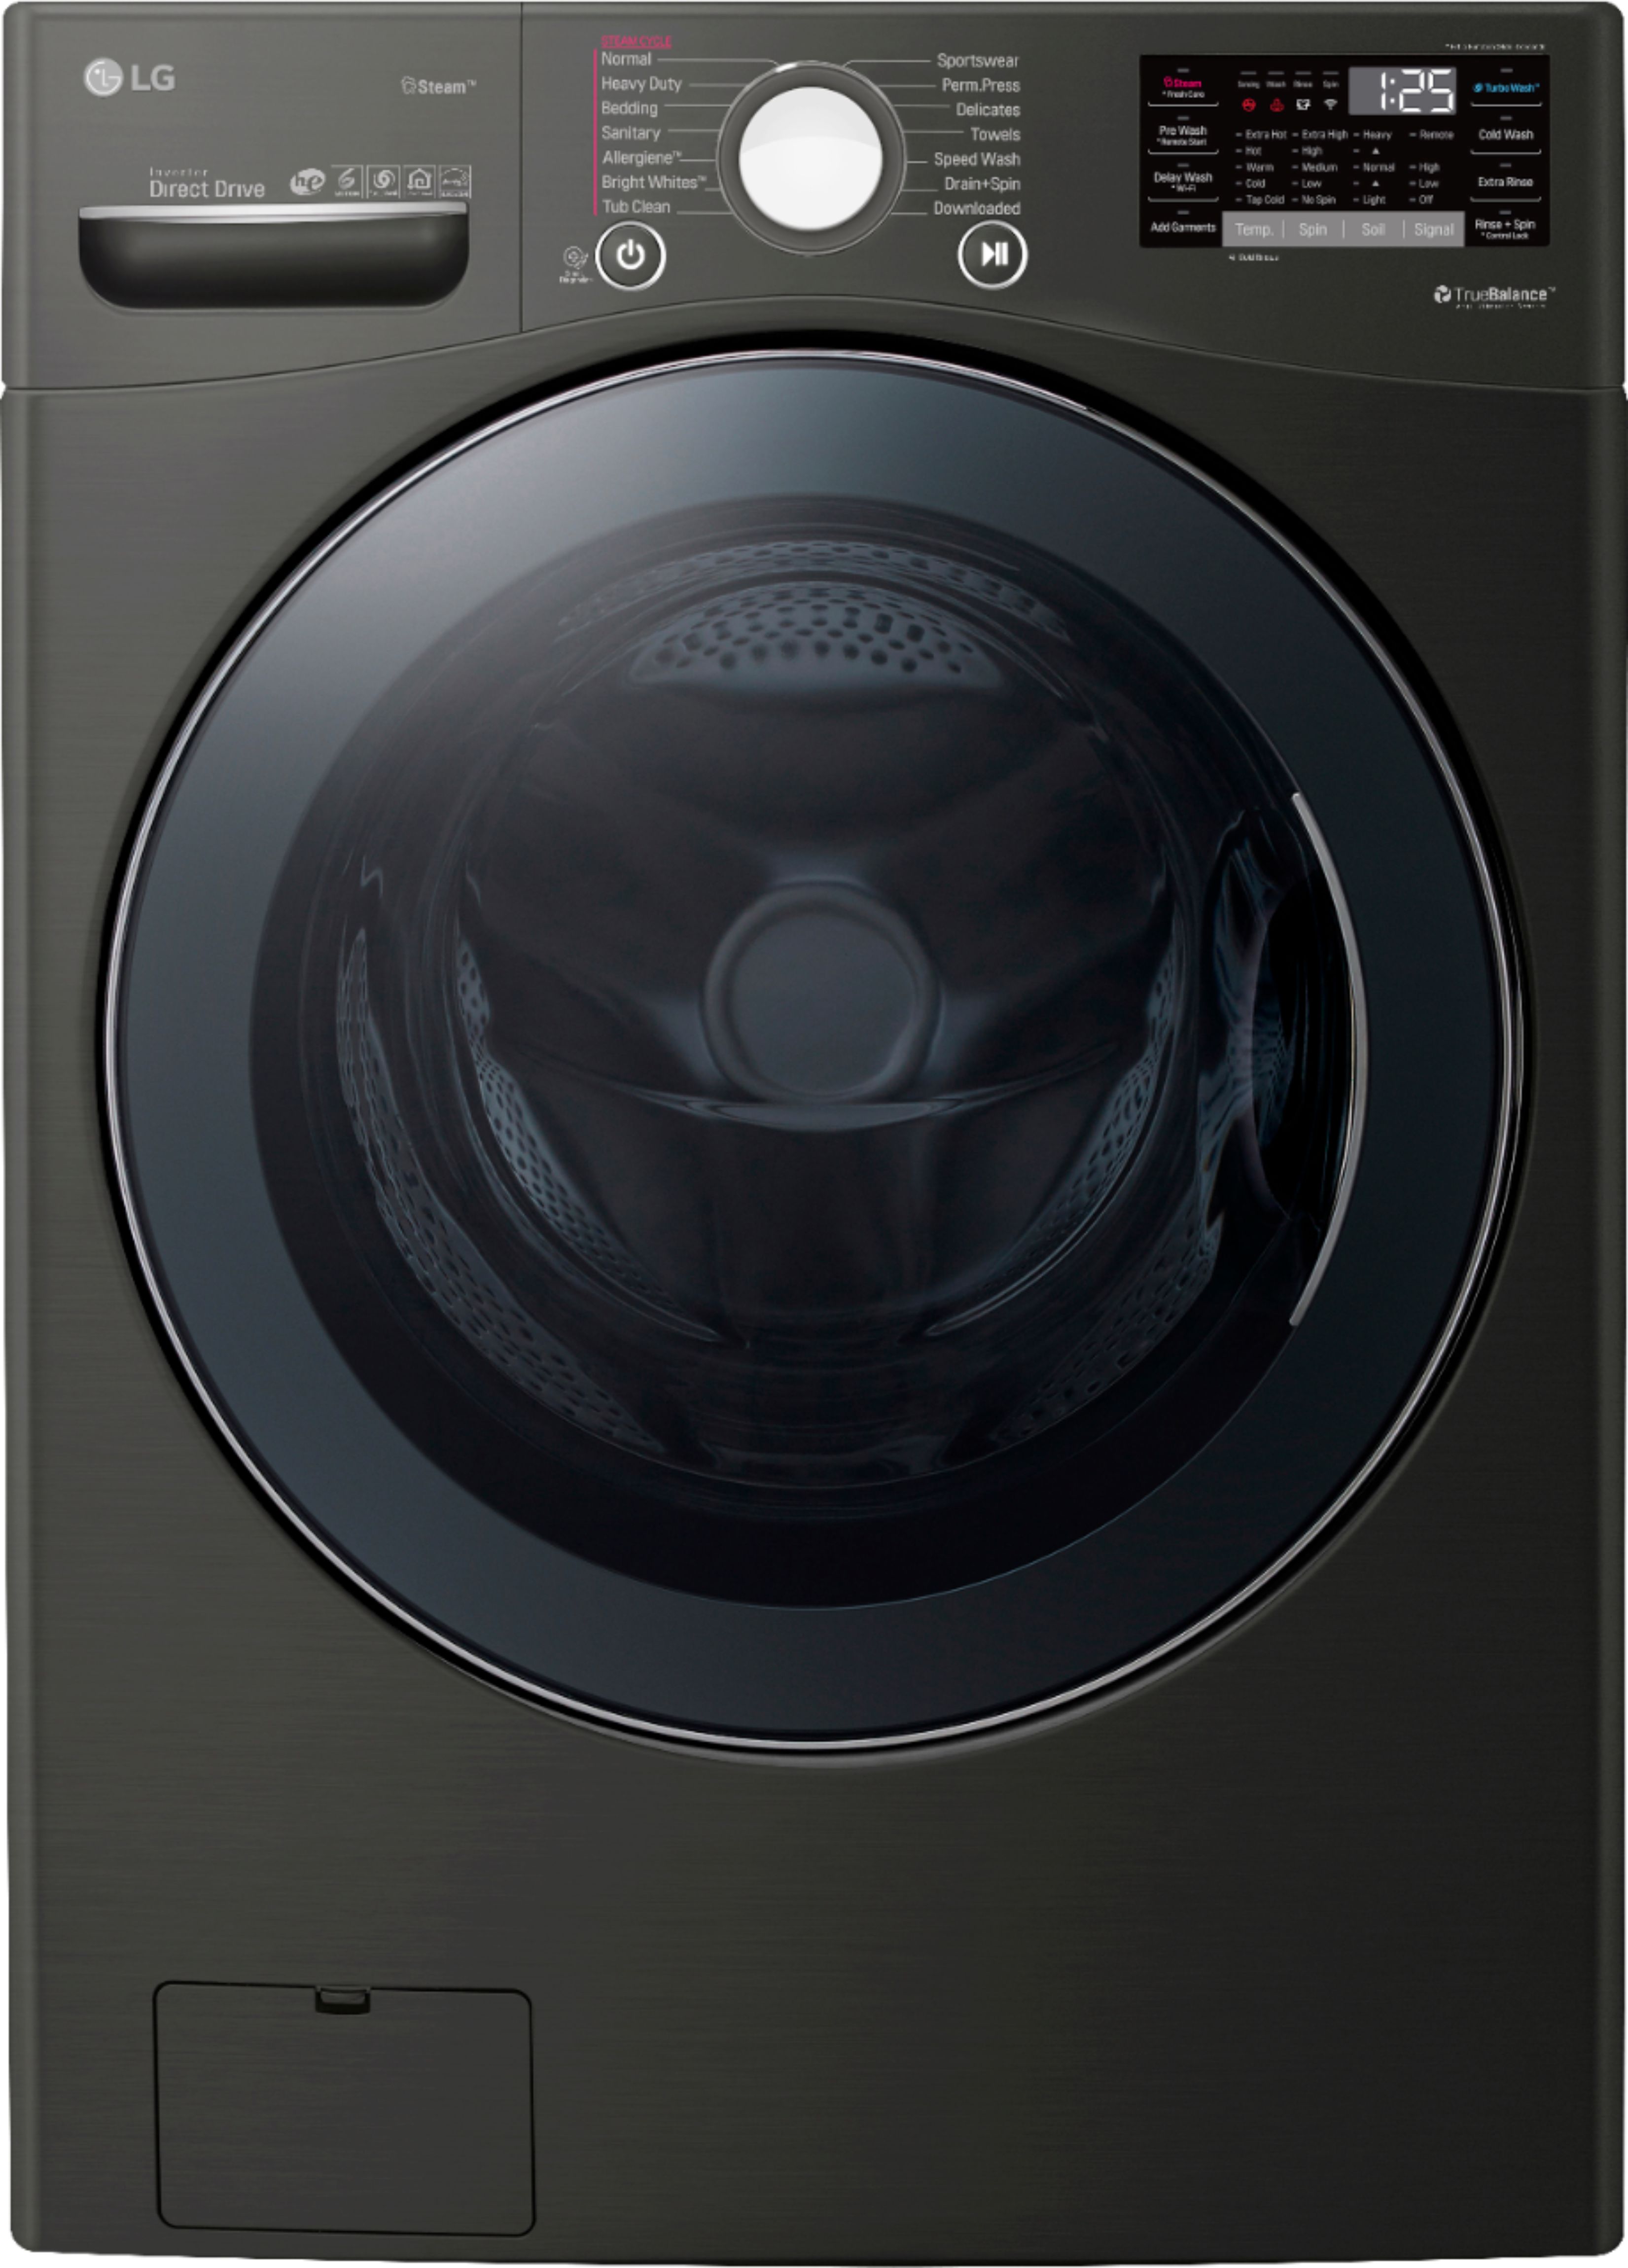 Customer Reviews Lg 4 5 Cu Ft 14 Cycle Front Loading Washer With Wifi Steam And Turbowash 360 Technology Black Steel Wm3900hba Best Buy